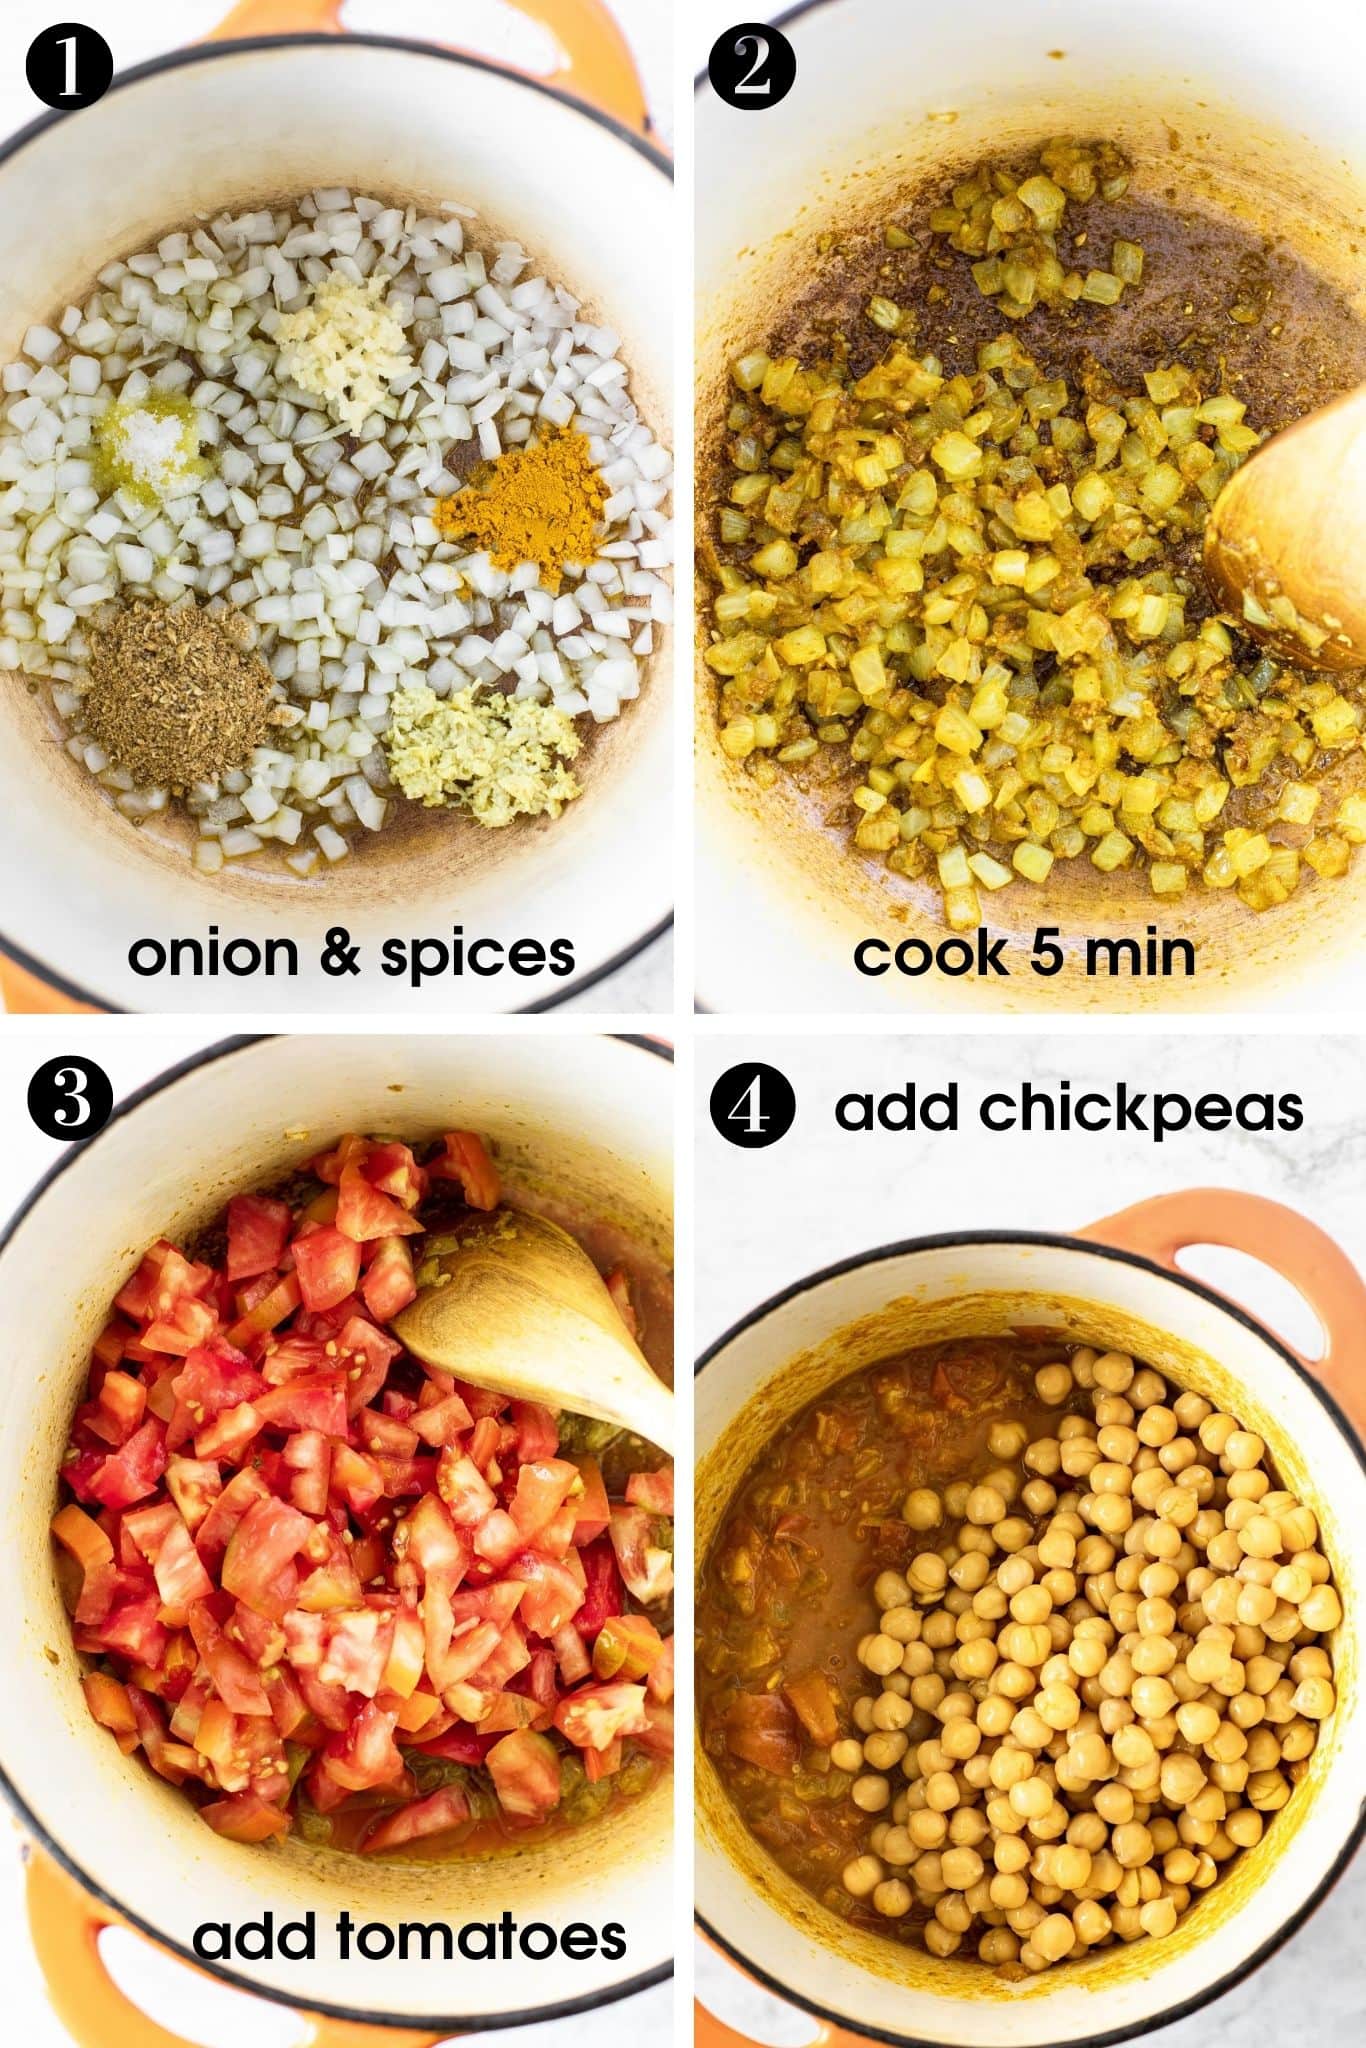 Four easy steps to cook Quick Vegan Chickpea Tomato Curry by cooking onion with spices, adding tomatoes, and chickpeas - from verygoodcook.com